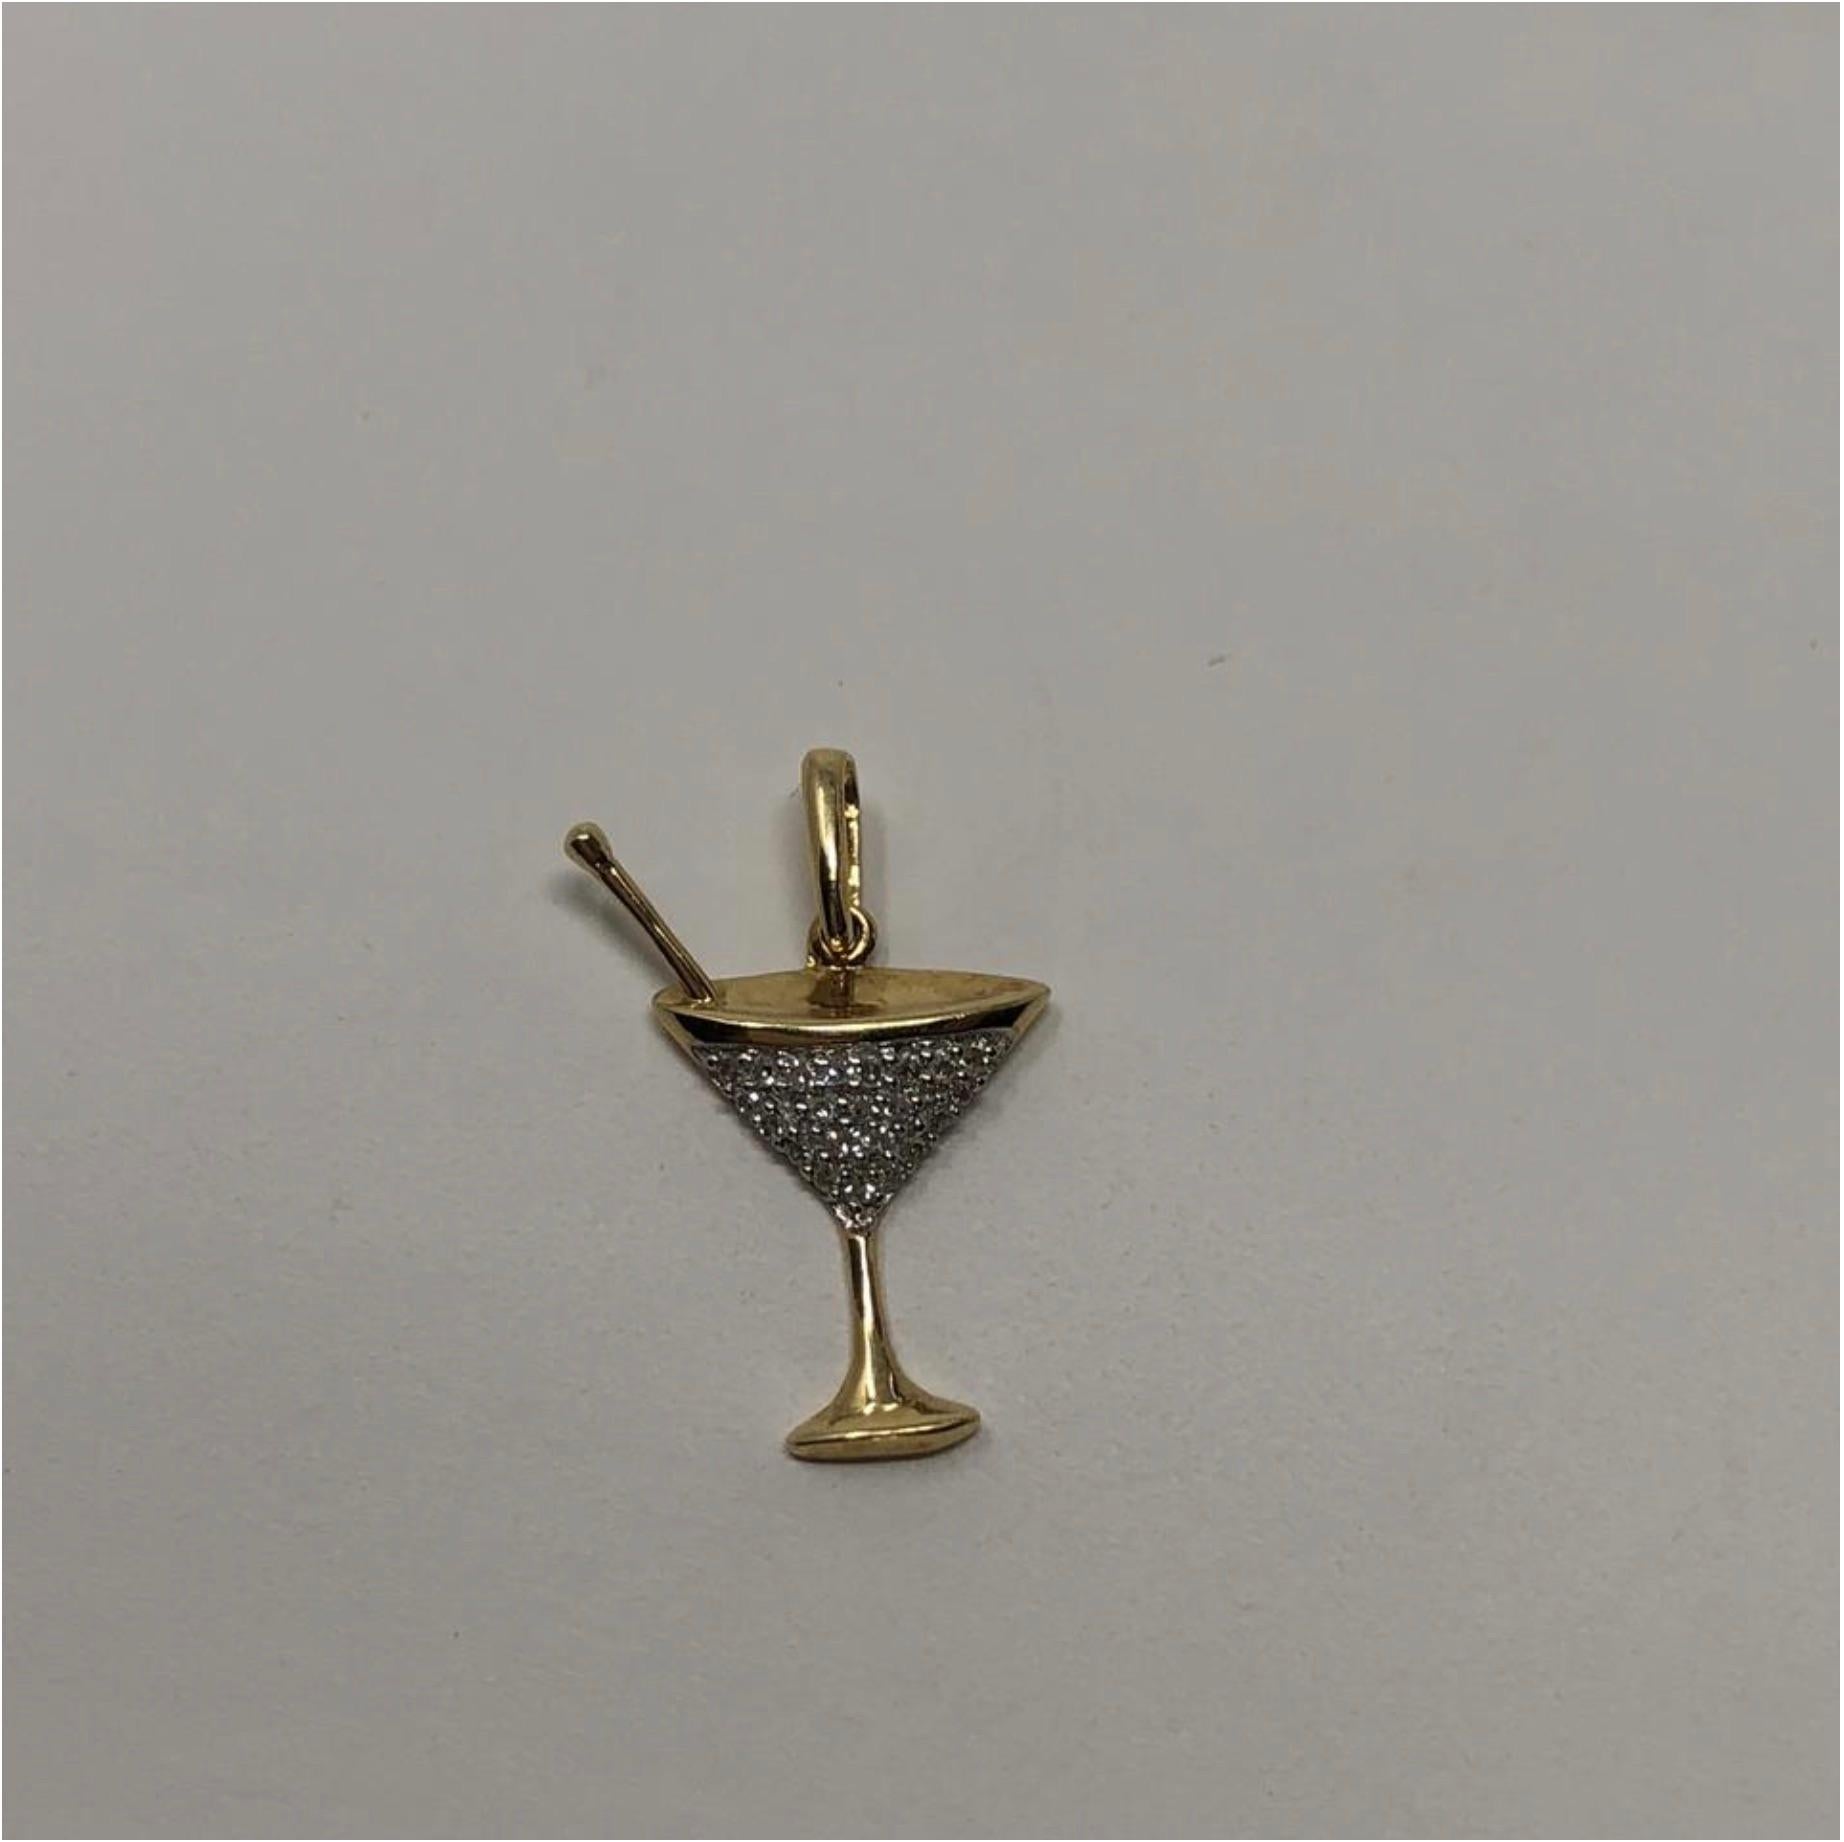 MODEL - Vintage 14k Gold .15ct TDW Diamond Martini Glass Pendent Charm

CONDITION - Exceptional! No signs of wear.

SKU - 2383-FL

ORIGINAL RETAIL PRICE - 175 + tax

MATERIAL - 14k Gold

WEIGHT - .95 grams

DIMENSIONS - L.6 x H.75 x D.2

COMES WITH